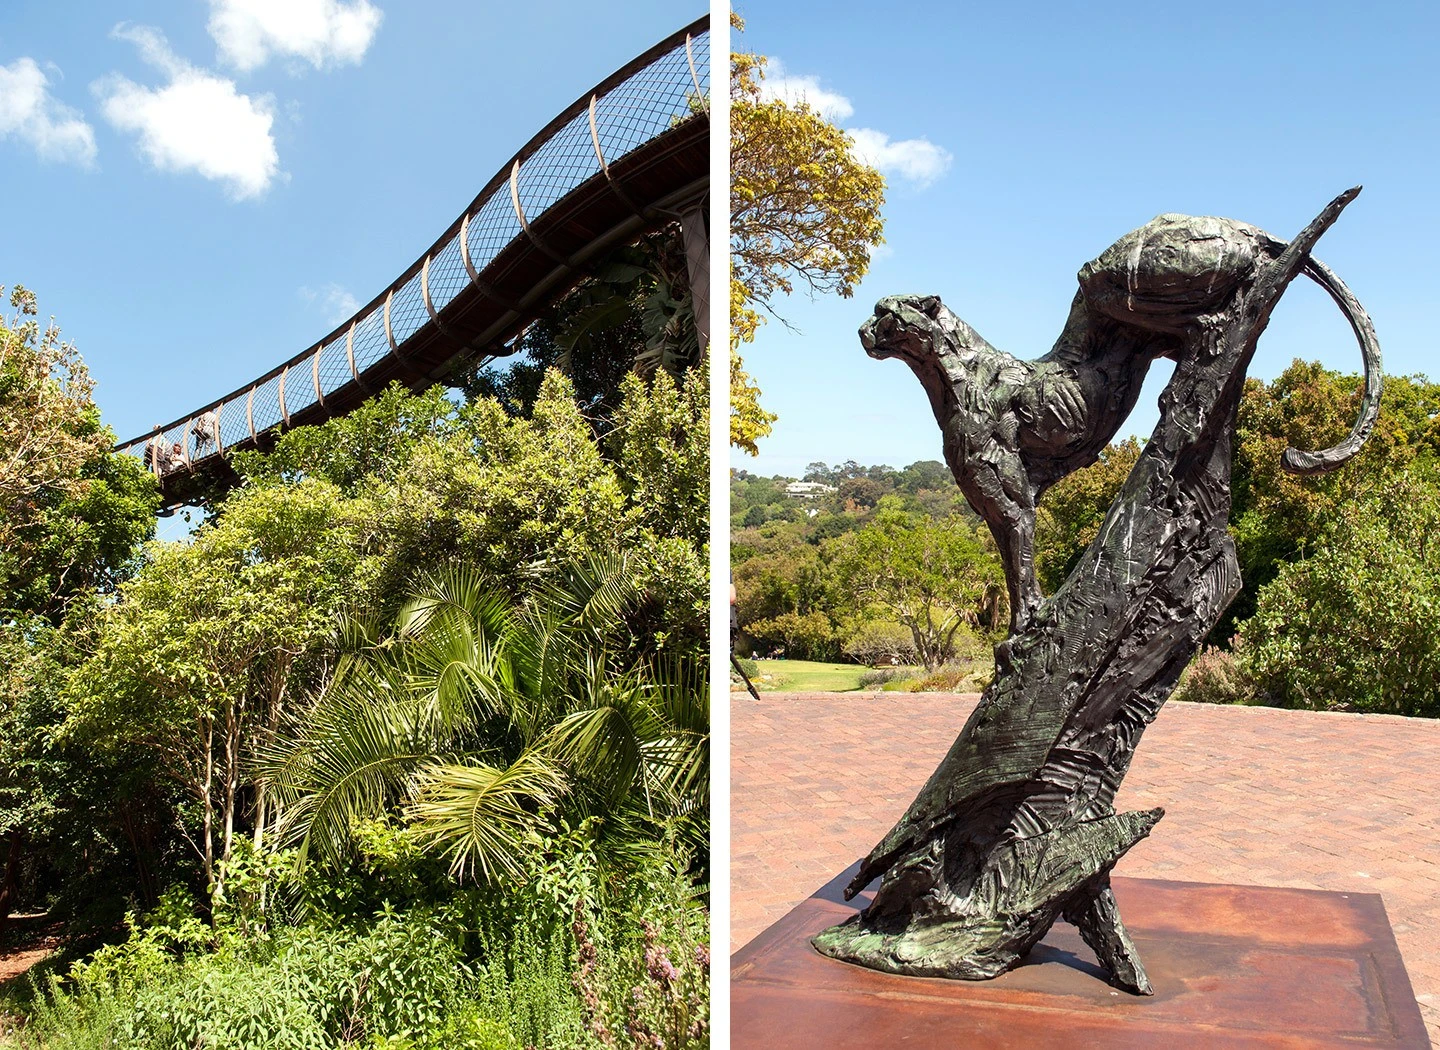 Kirstenbosch National Botanical Gardens in South Africa – tree walkway and leopard statue